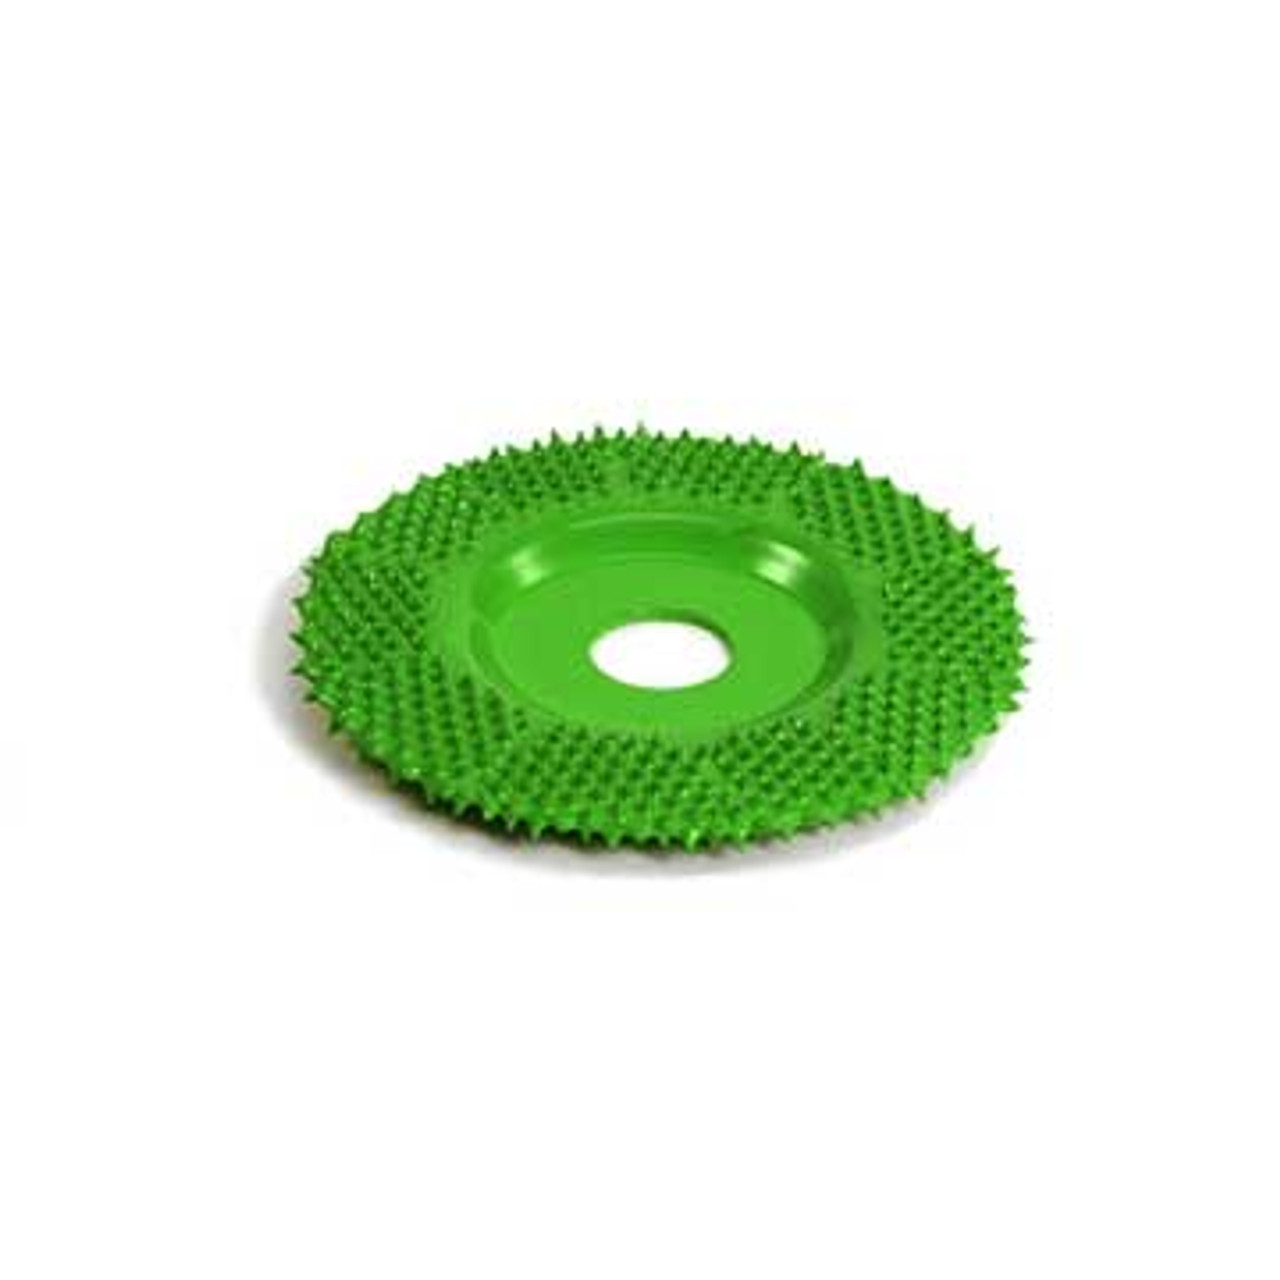 Showing an image of the green SaburrTooth 2 X 3/8 Flat Grooving Wheel Coarse Grit .